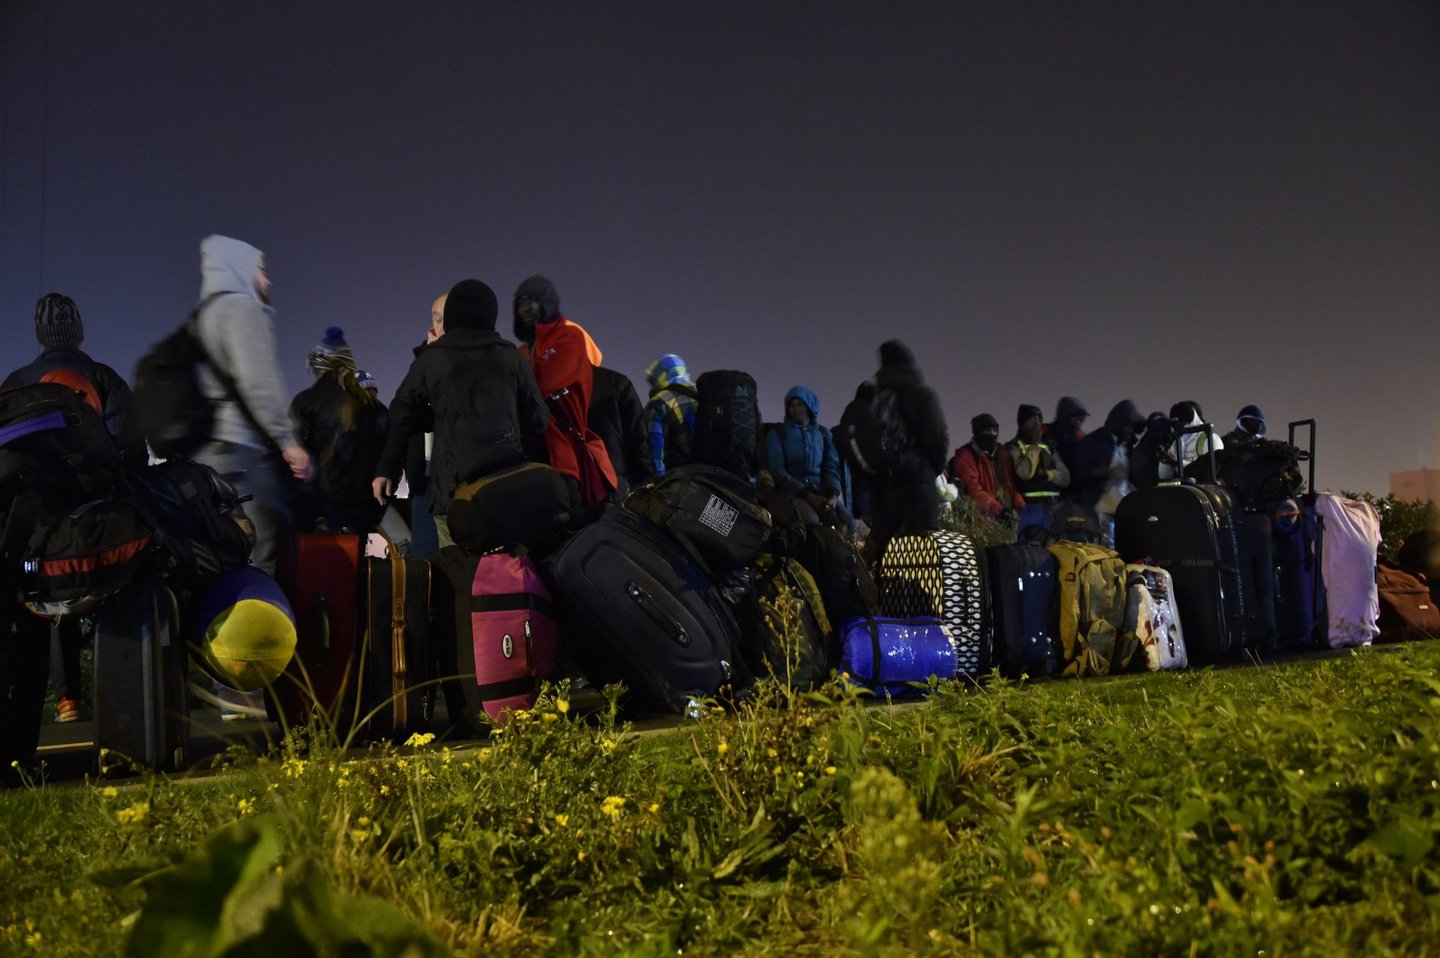 Migrants queue for transportation by bus to reception centres across France, from the "Jungle" migrant camp in Calais, northern France, on October 24, 2016. French authorities are set to begin on October 24, 2016 moving thousands of people out of the notorious Calais Jungle before demolishing the camp that has served as a launchpad for attempts to sneak into Britain. A major three-day operation is planned to clear the sprawling shanty town near Calais port -- a symbol of Europe's failure to resolve its migrant crisis -- of its estimated 6,000-8,000 occupants. The current Jungle camp dates from April 2015 and housed more than 10,000 migrants at its peak, although that number has dwindled to around 5,000 in its final days. / AFP / PHILIPPE HUGUEN (Photo credit should read PHILIPPE HUGUEN/AFP/Getty Images)